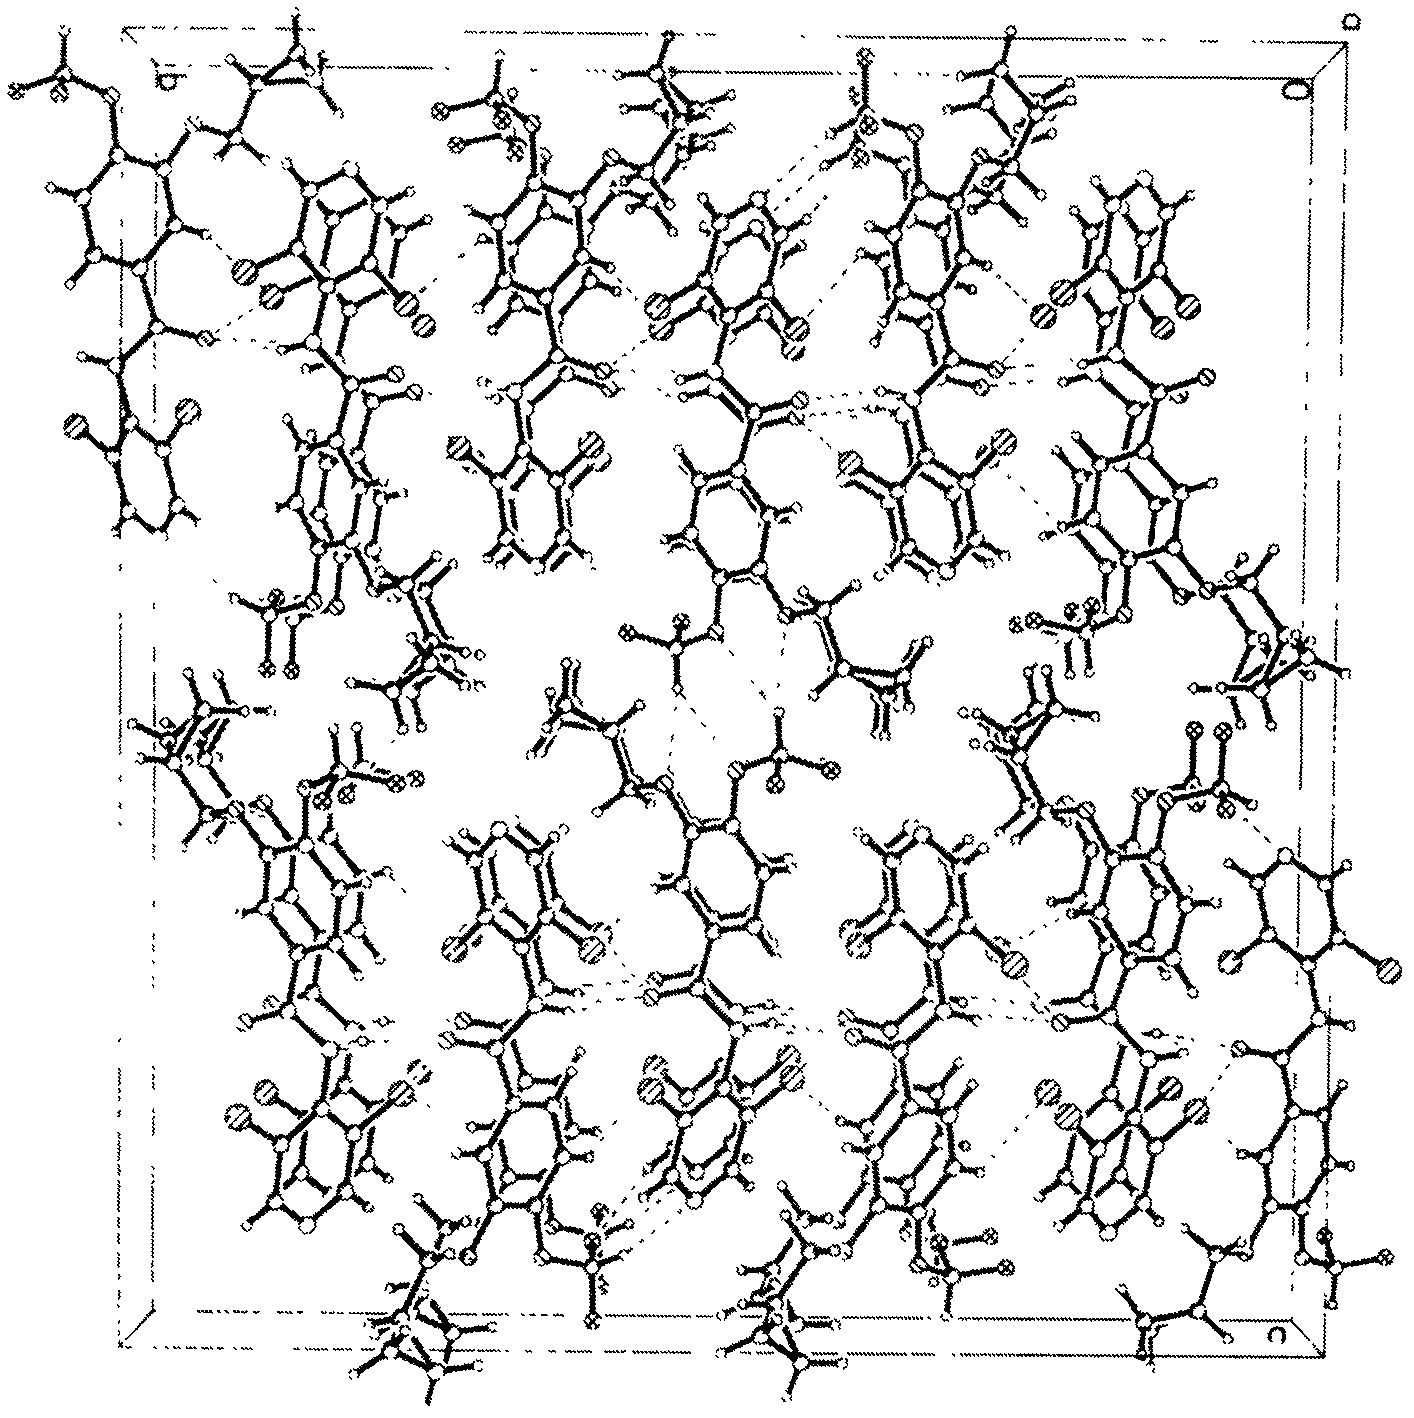 Roflumilast crystal form compound, preparation method, composition and applications thereof